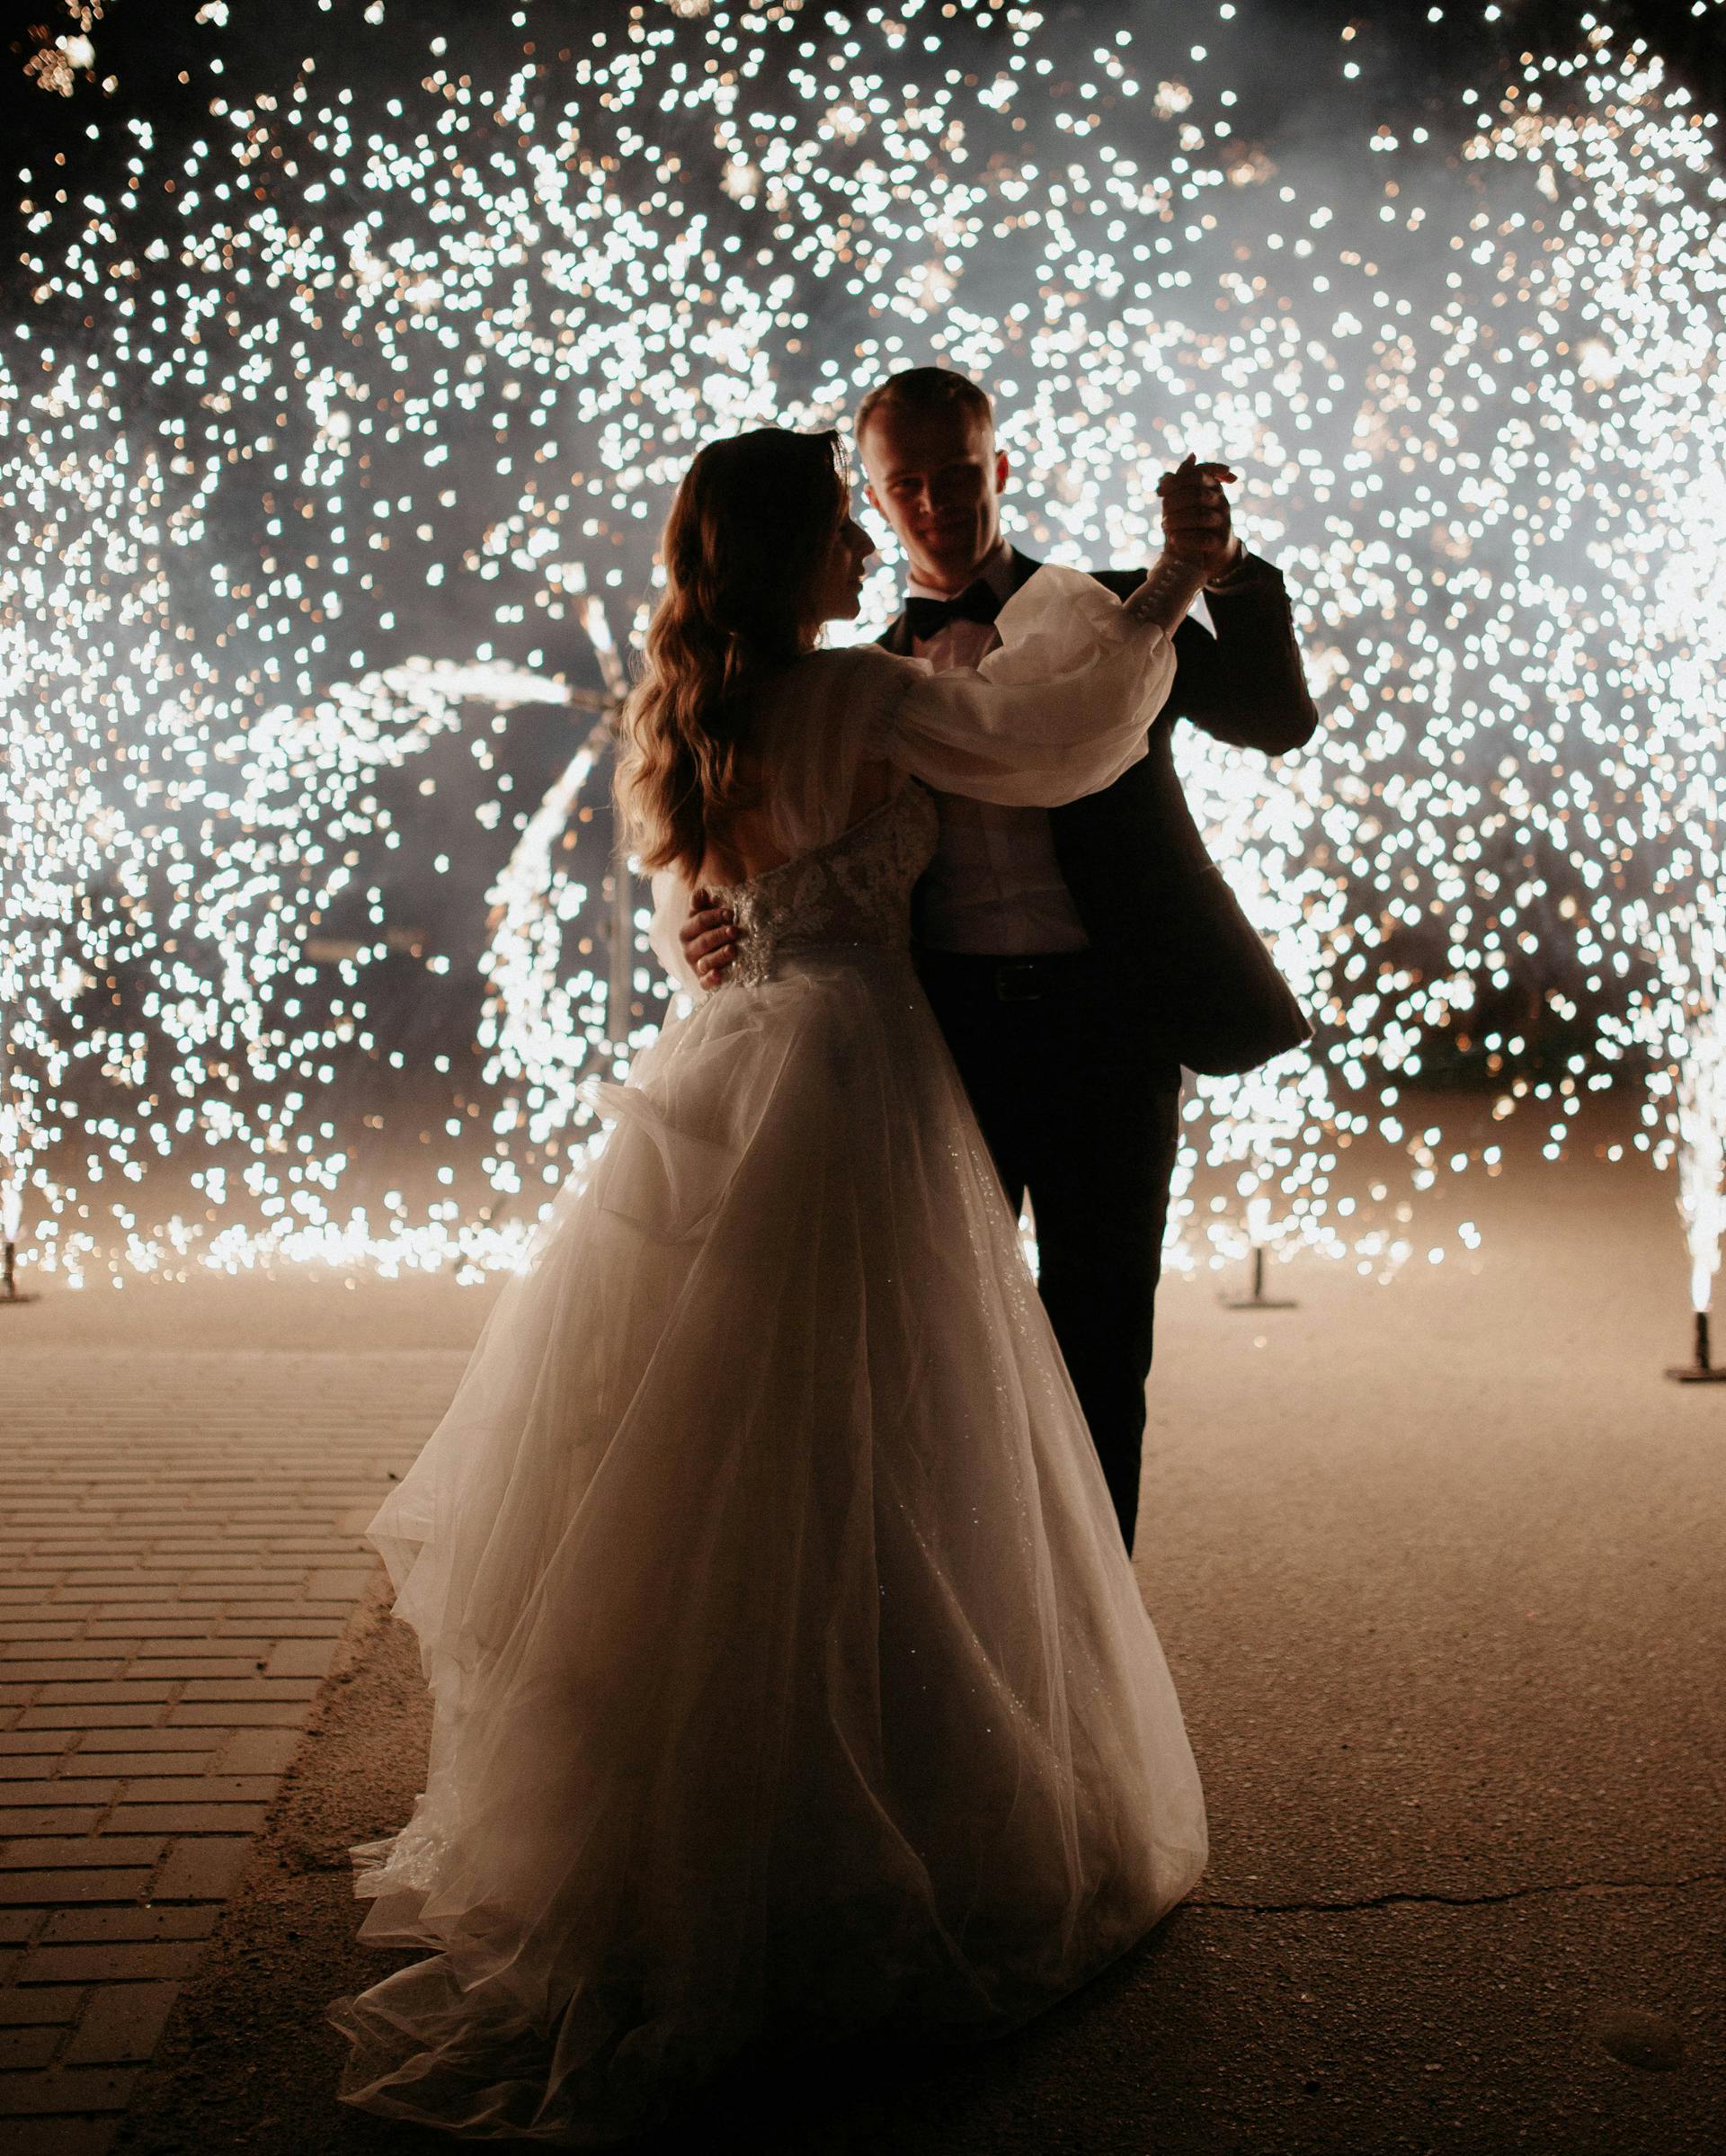 A bride and groom dancing with fireworks in the dark | Source: Pexels